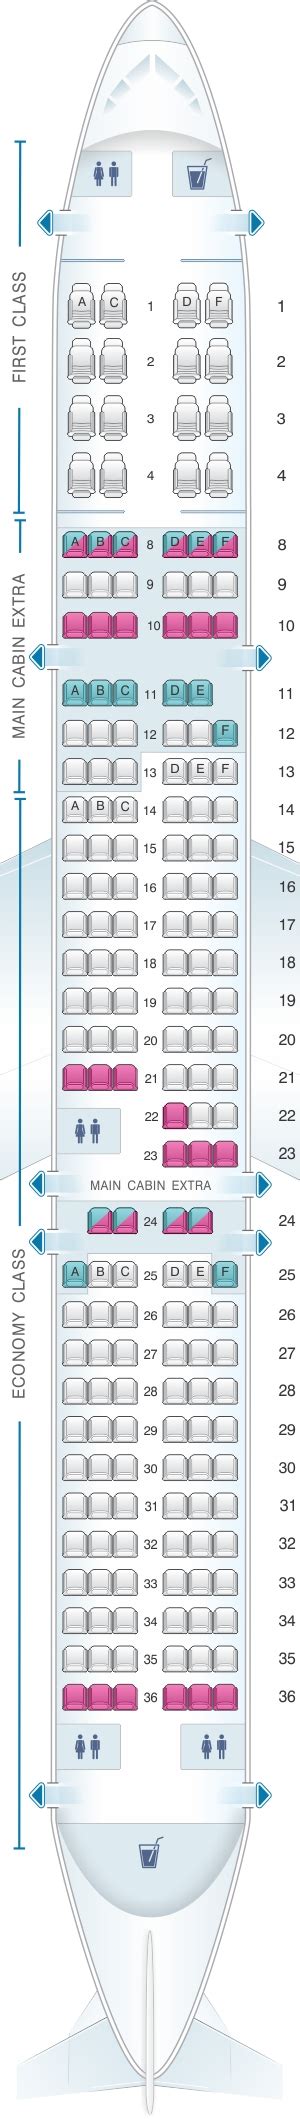 Airbus A321 American Seat Map Image To U